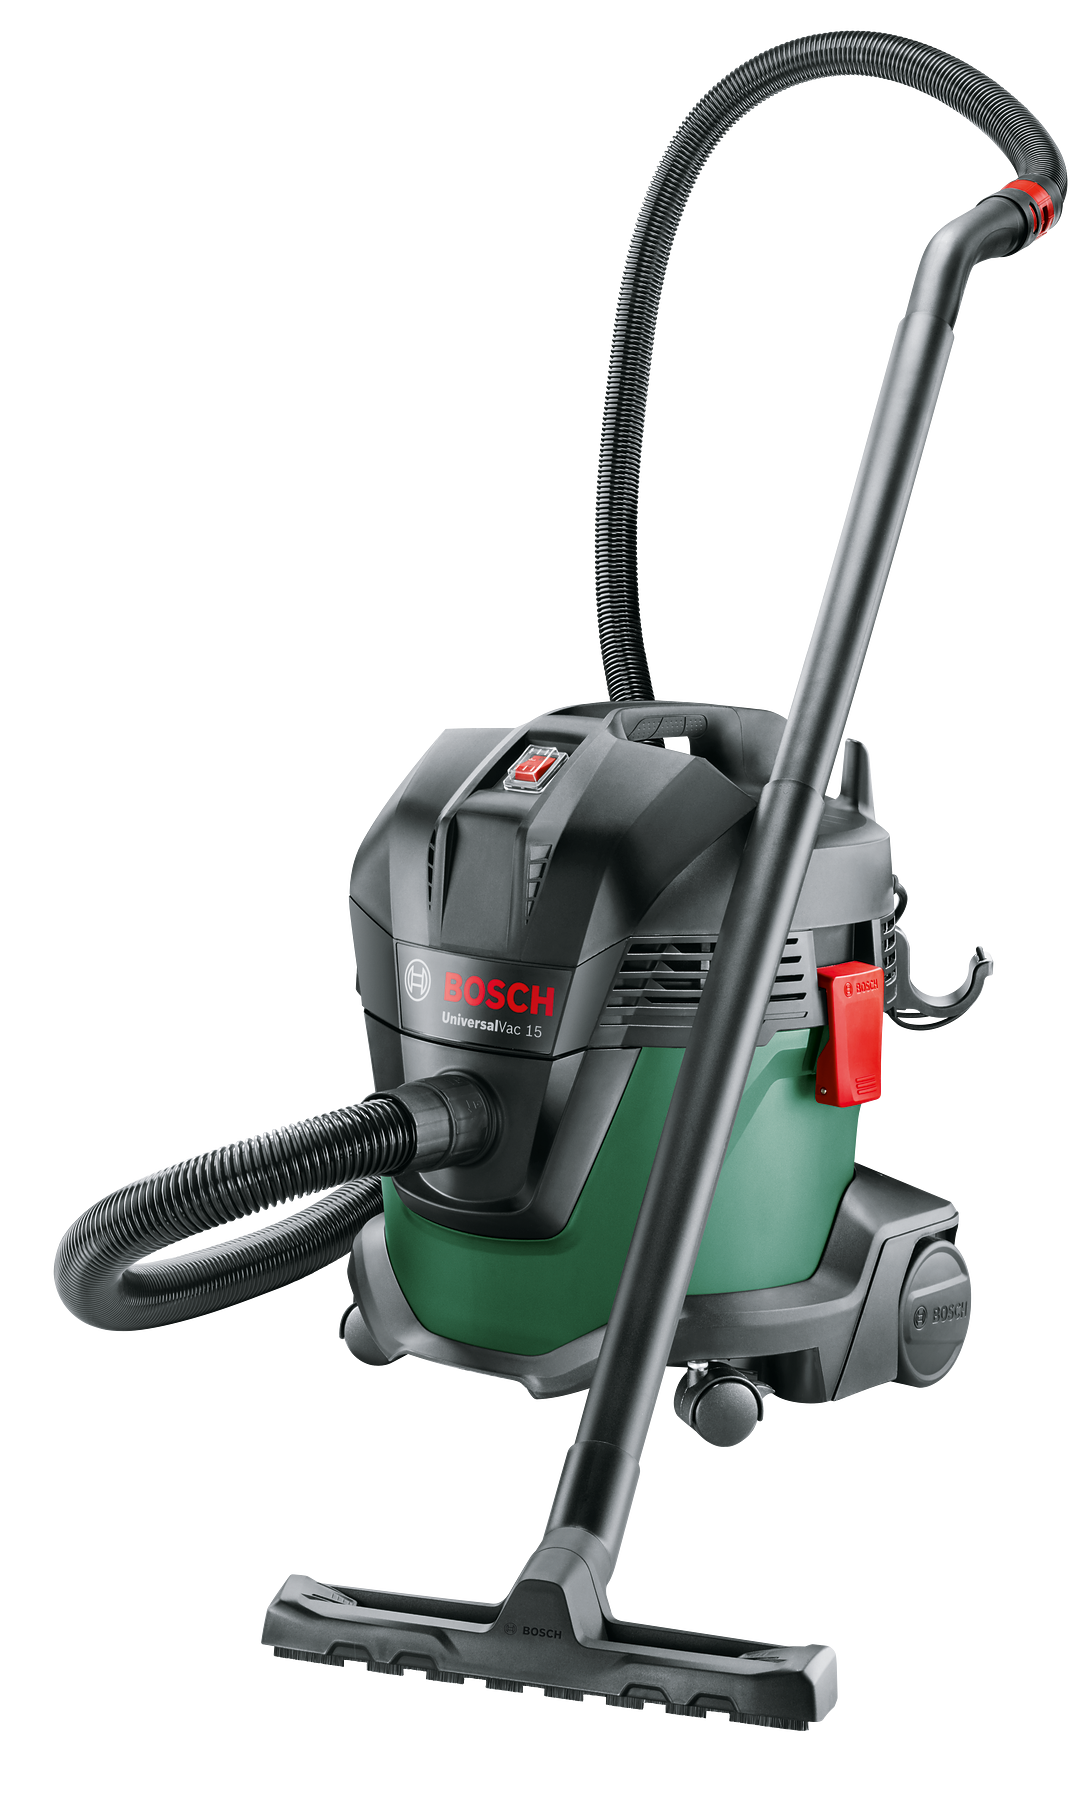 Bosch - Wet And Dry Vacuum Cleaner - Universal Vac 15